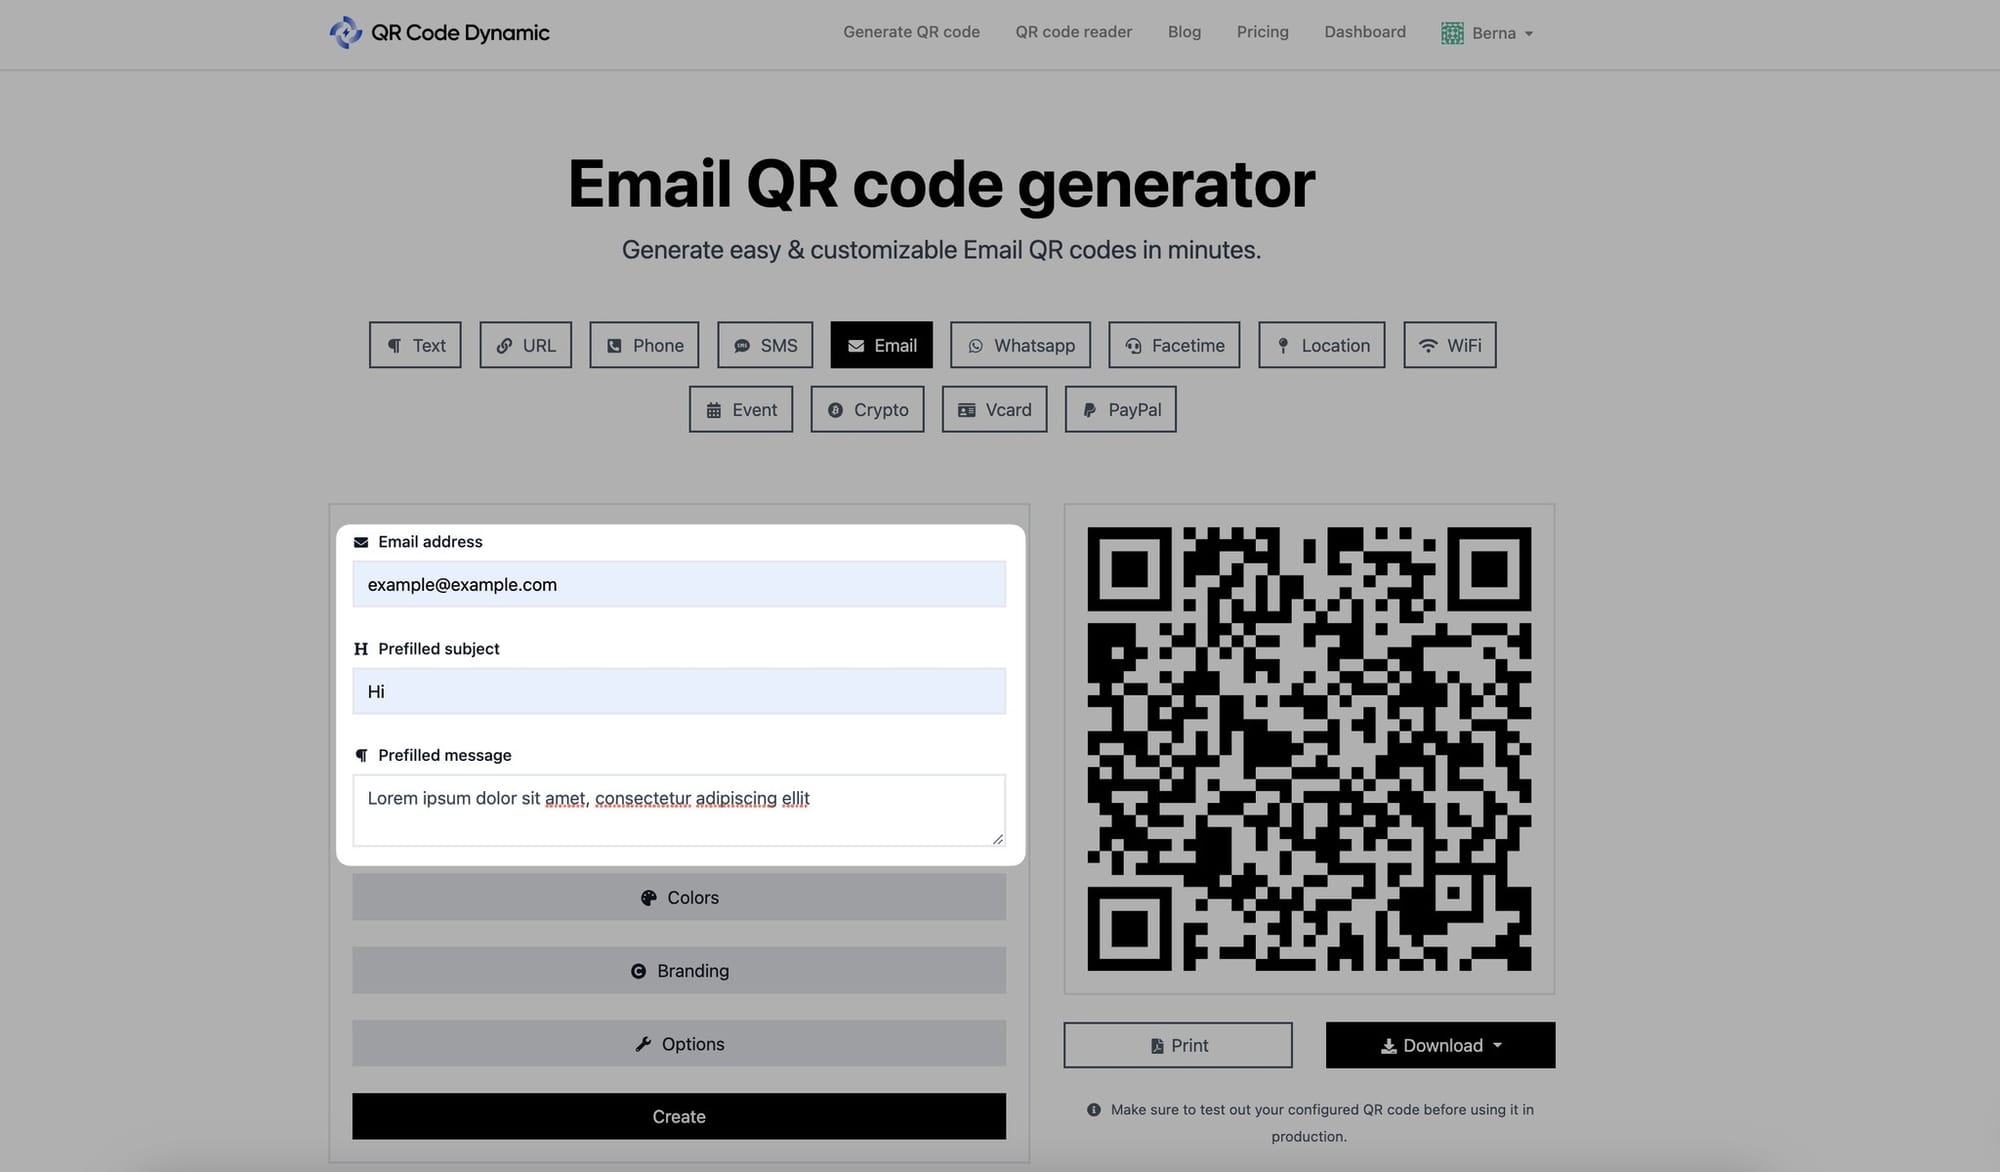 entering email address subject and message to email qr code